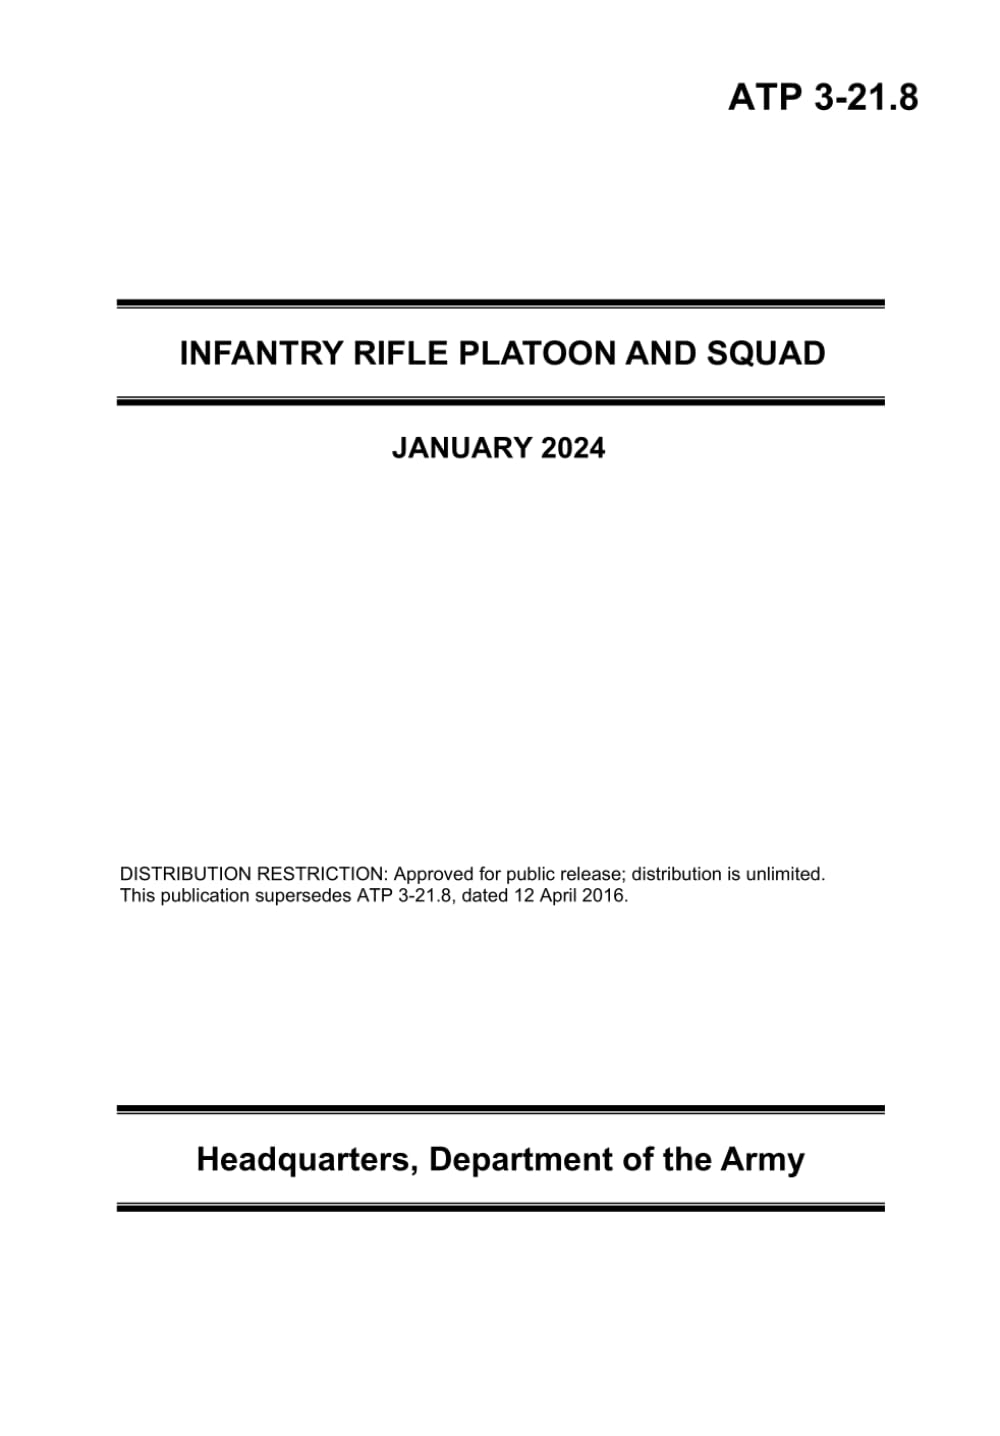 INFANTRY RIFLE PLATOON AND SQUAD (ATP 3-21.8)